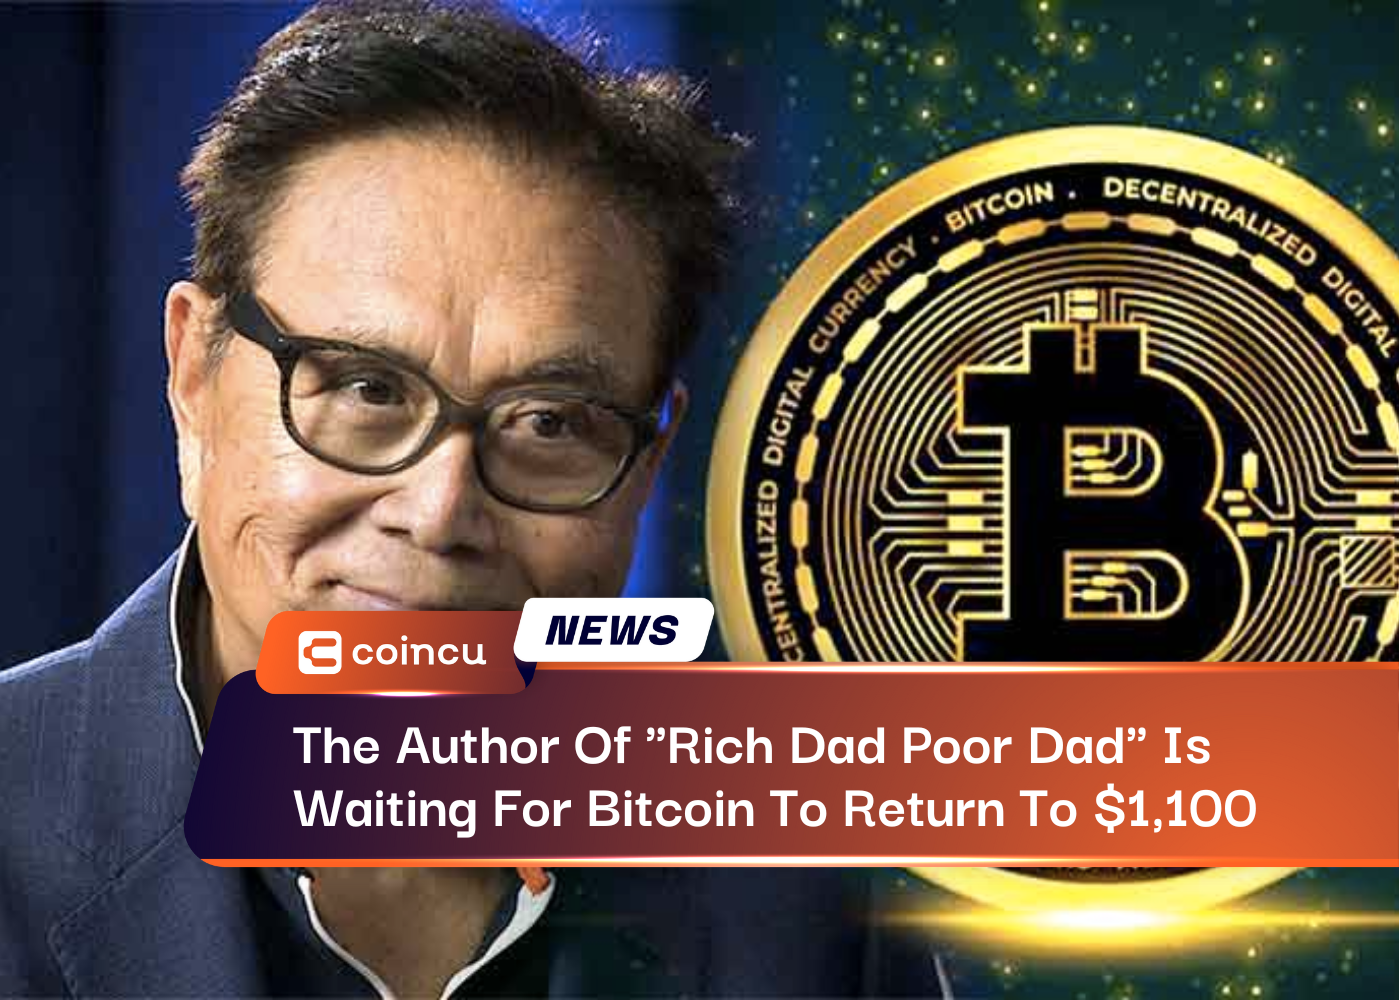 The Author Of "Rich Dad Poor Dad" Is Waiting For Bitcoin To Return To $1,100